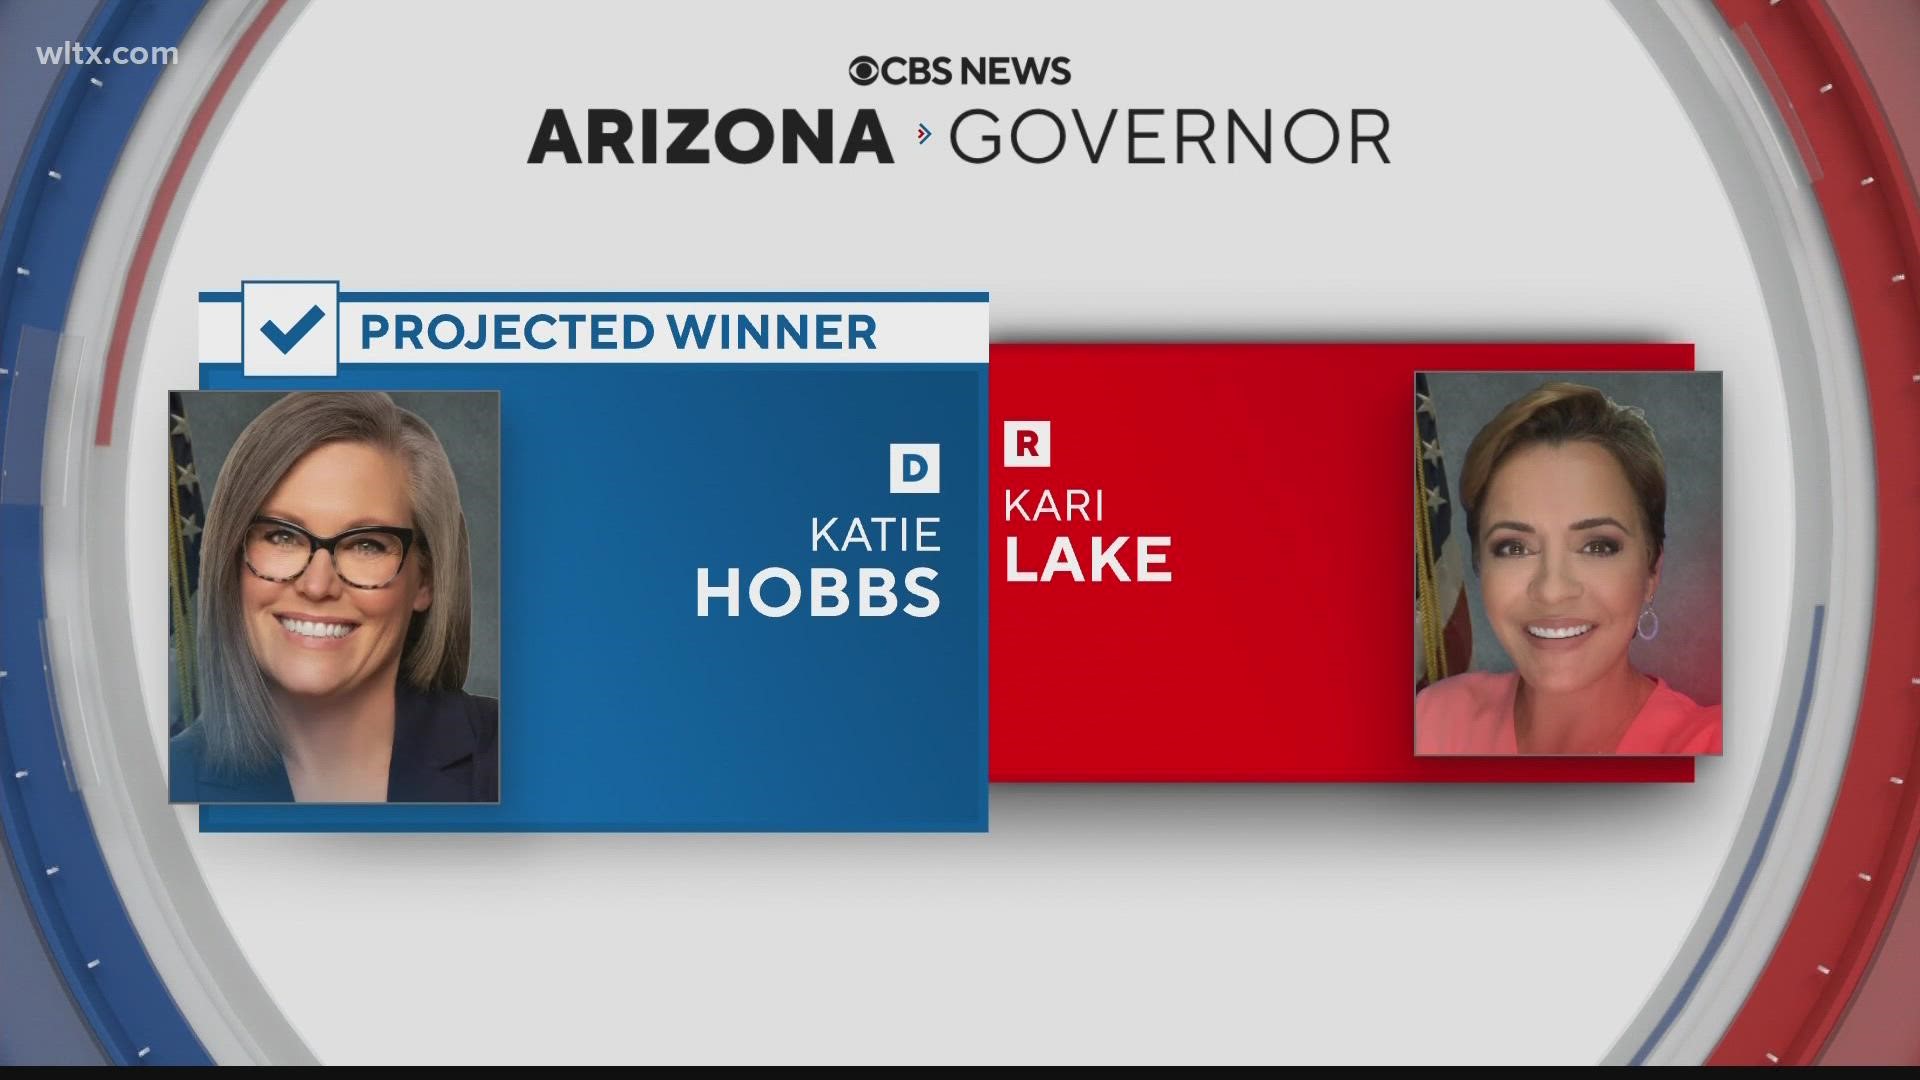 Katie Hobbs, who is Arizona’s secretary of state, rose to prominence as a staunch defender of the legitimacy of the last election.